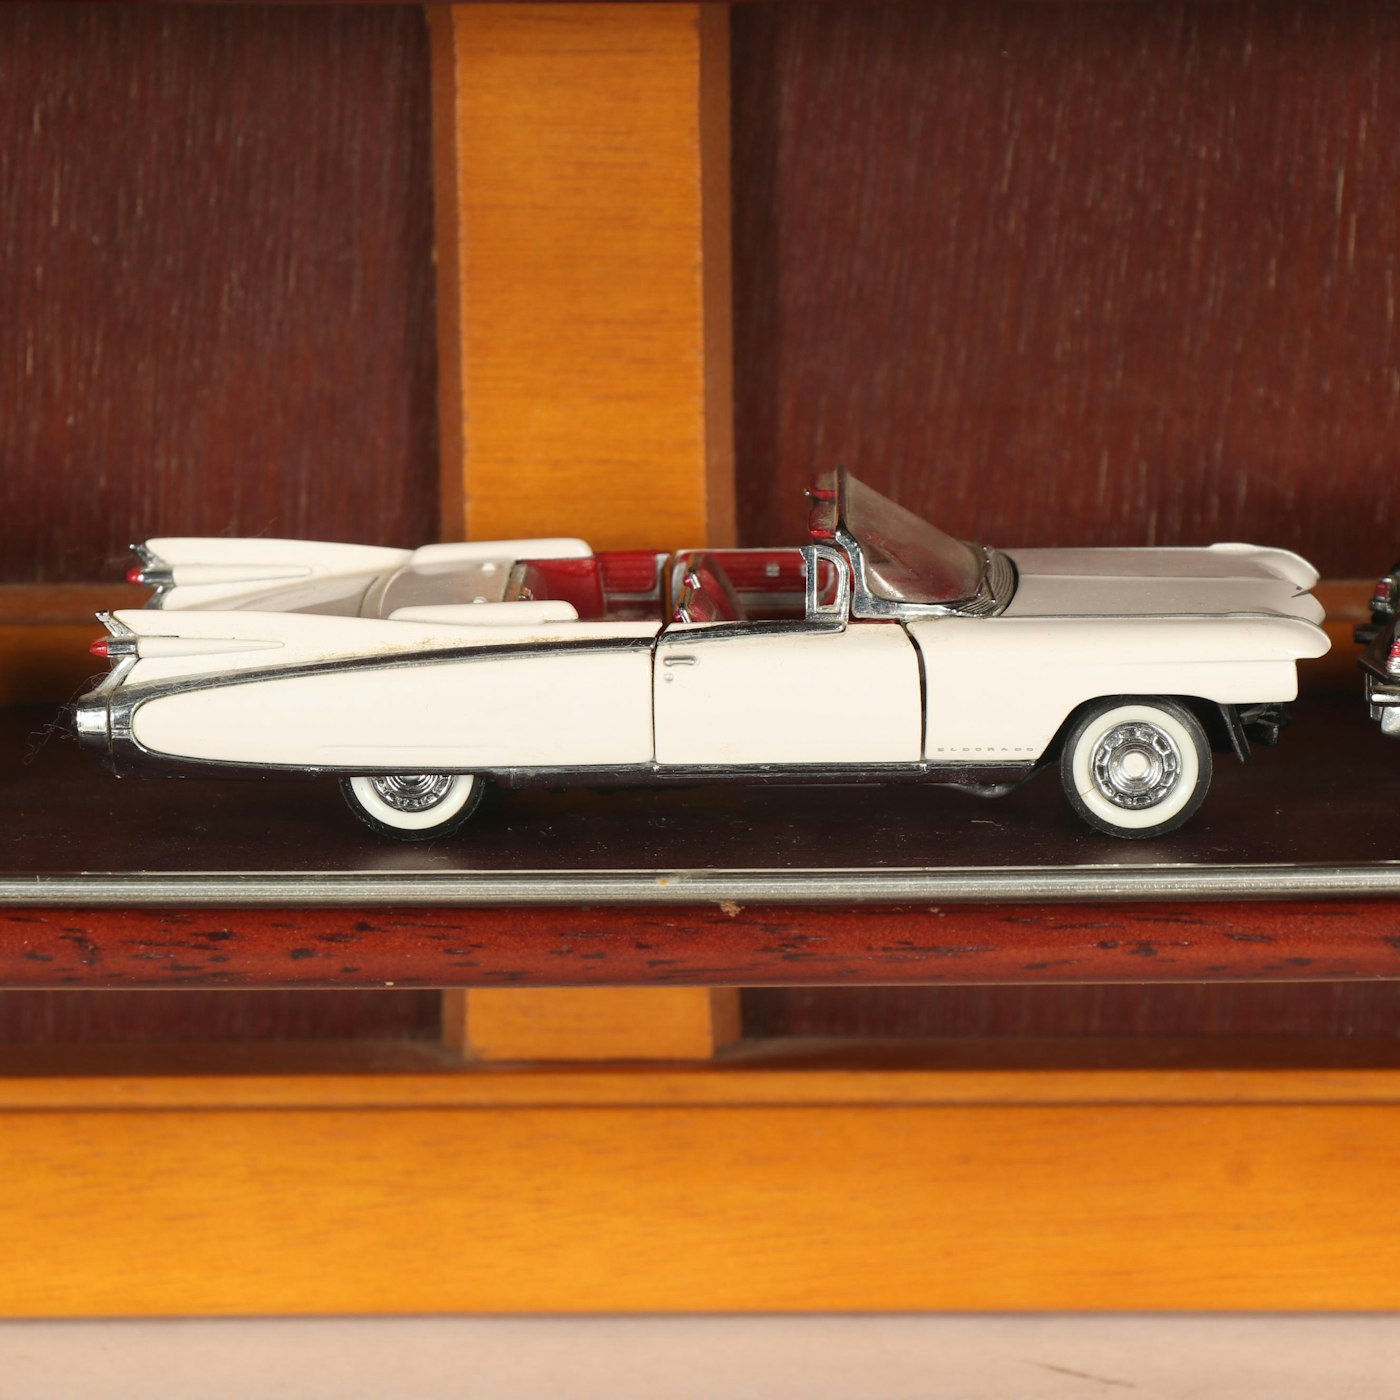 Franklin Mint "The Classic Cars of the Fifties" DieCast Cars and